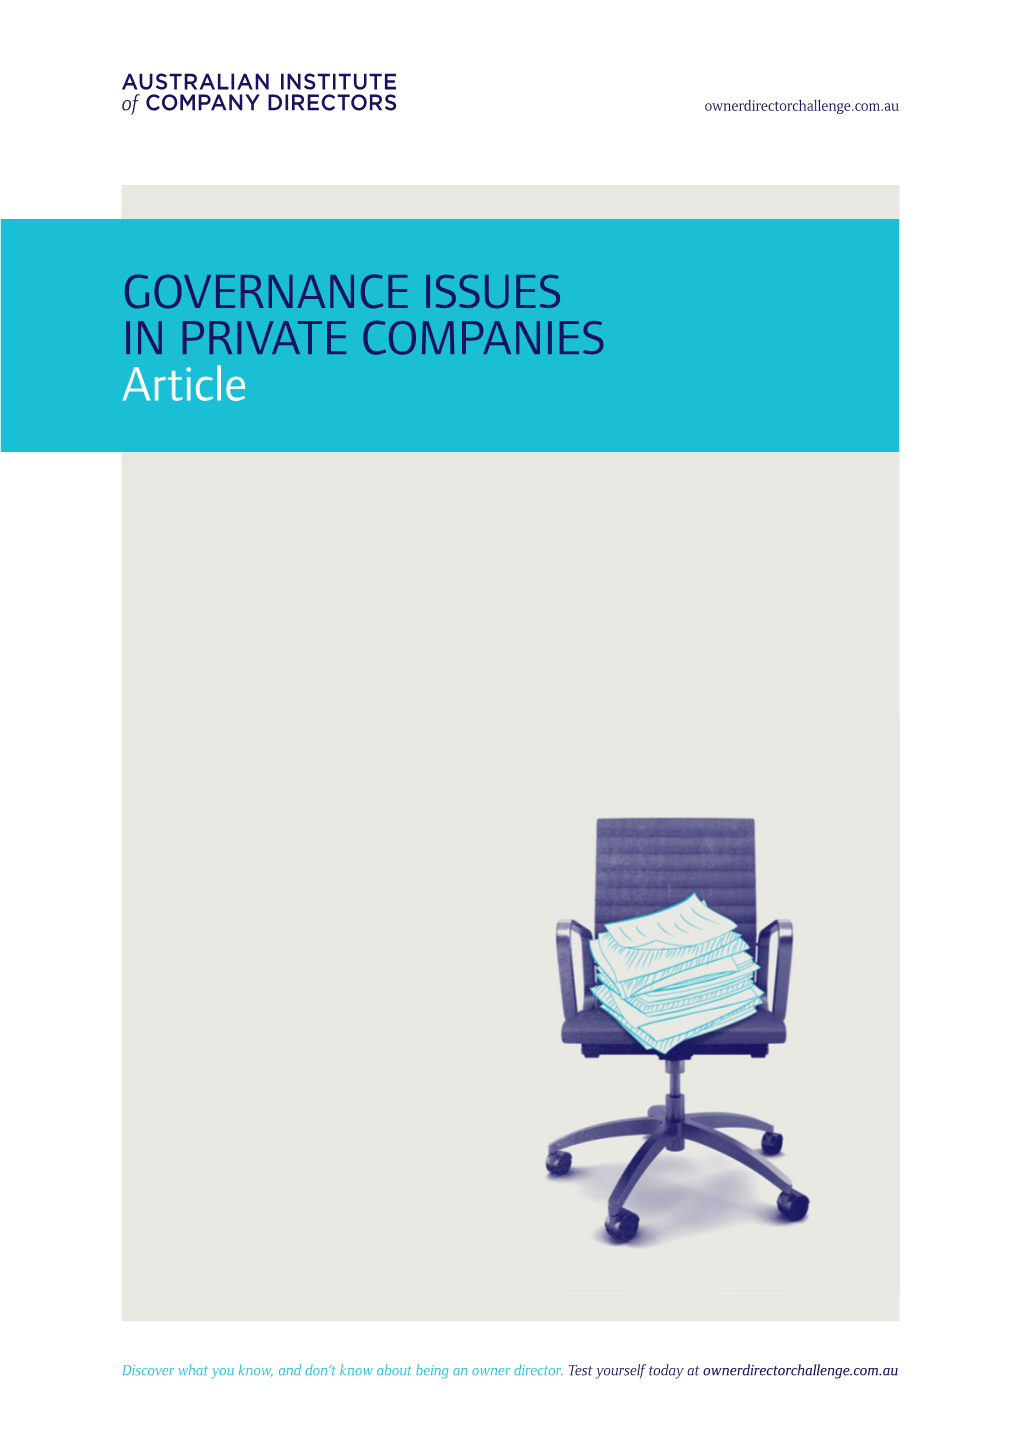 GOVERNANCE ISSUES in PRIVATE COMPANIES Article